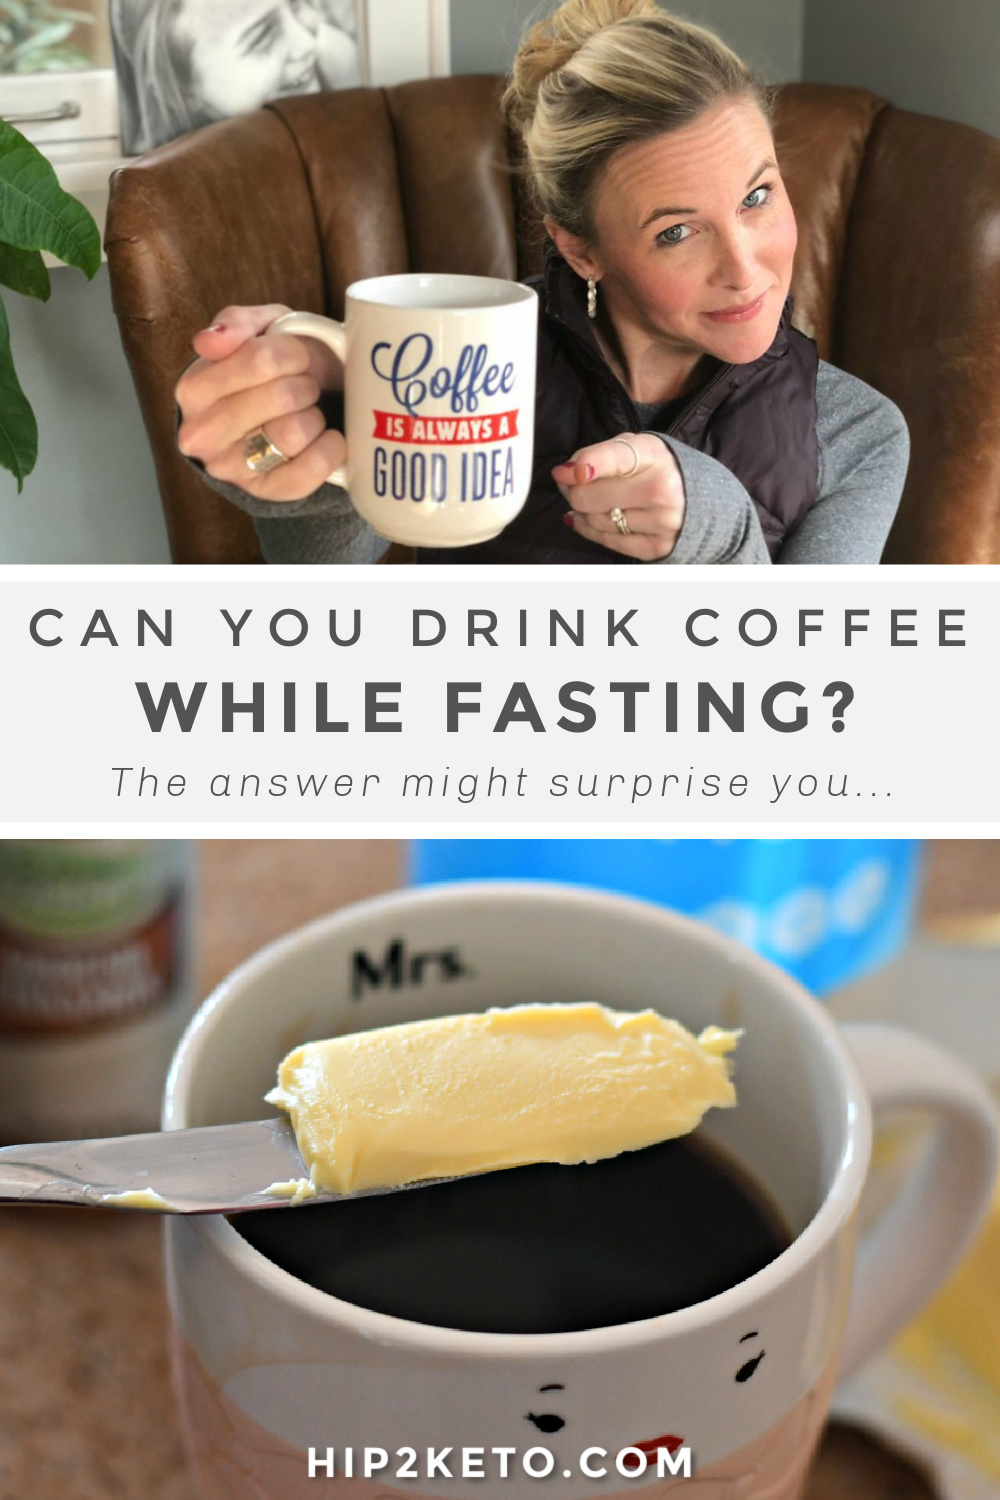 coffee creamer for fasting